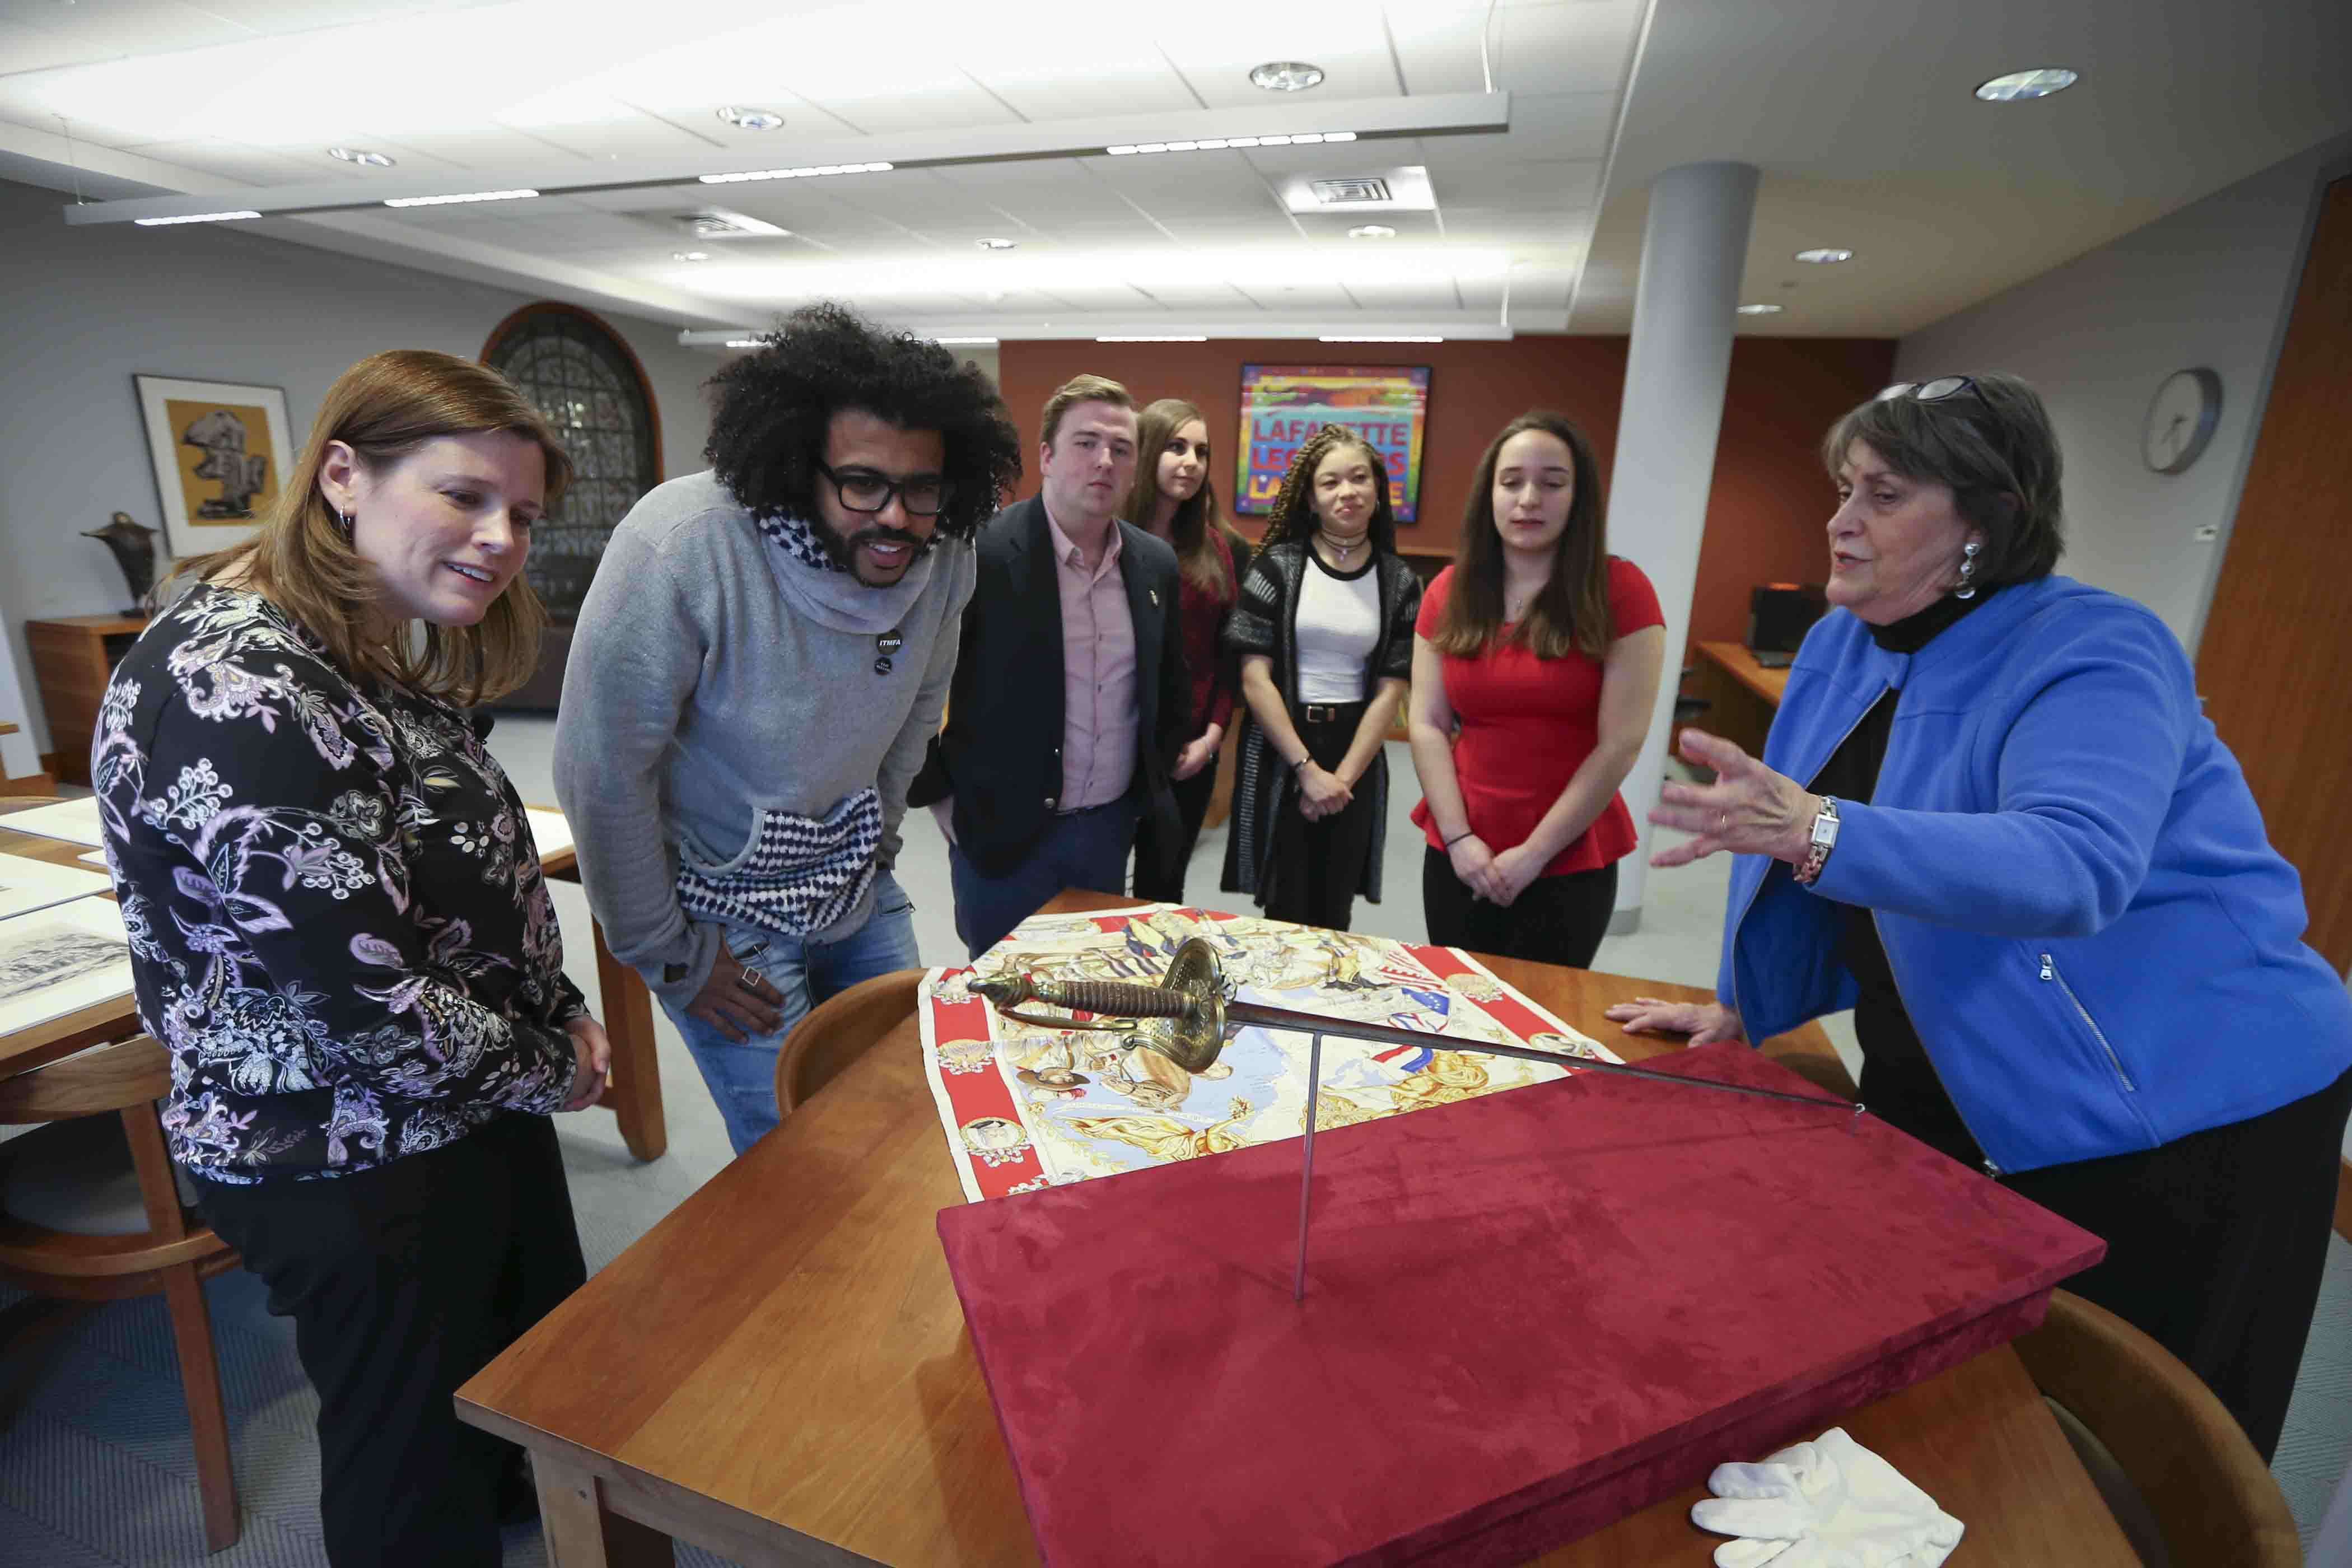 Hamilton star Daveed Diggs with Lafayette College Archivist Diane Shaw and others look at the Marquis de Lafayette's sword.